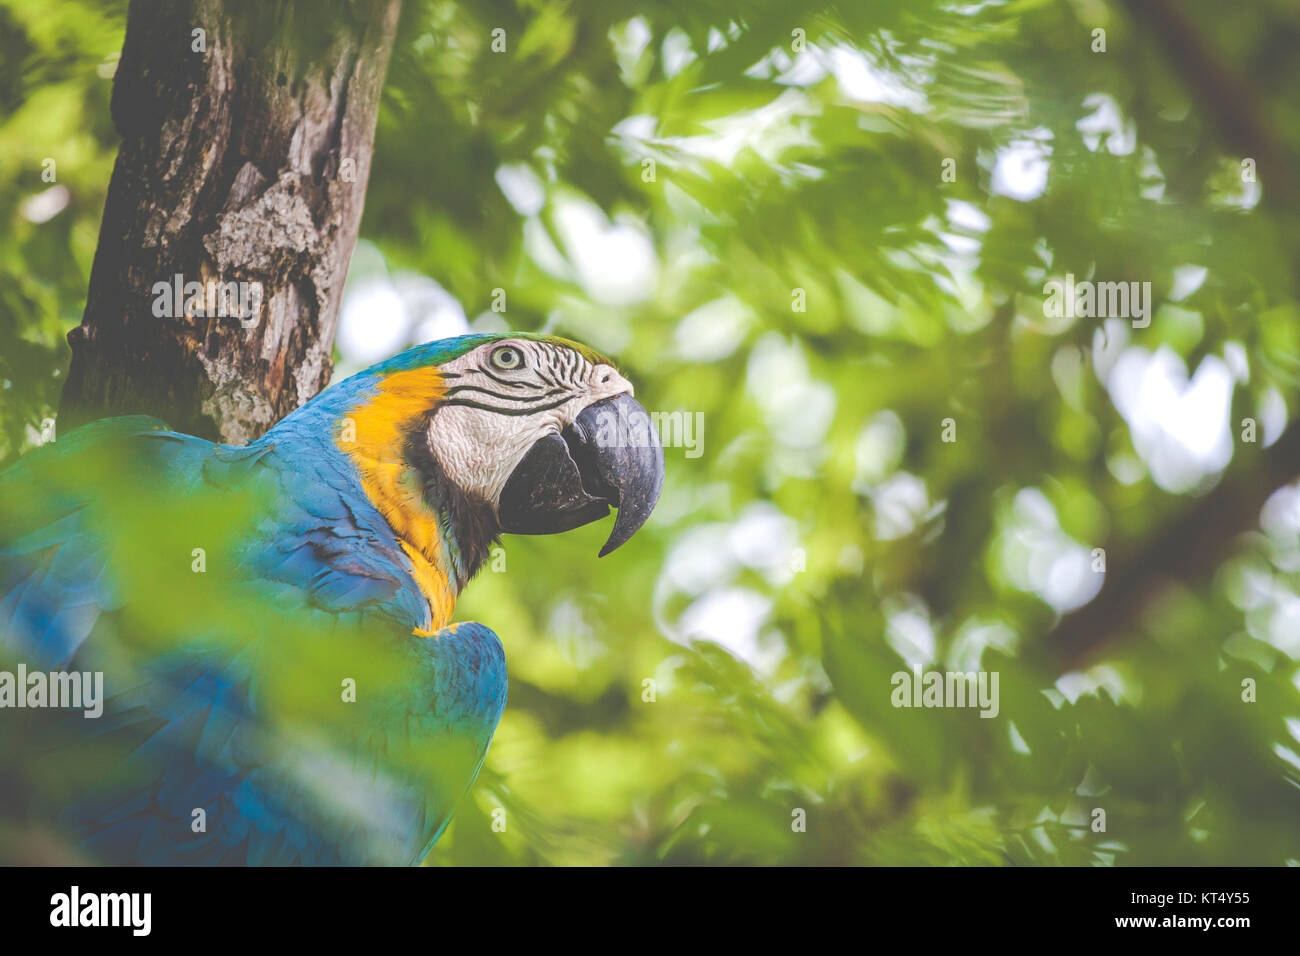 A blue and yellow mackaw parrot Stock Photo